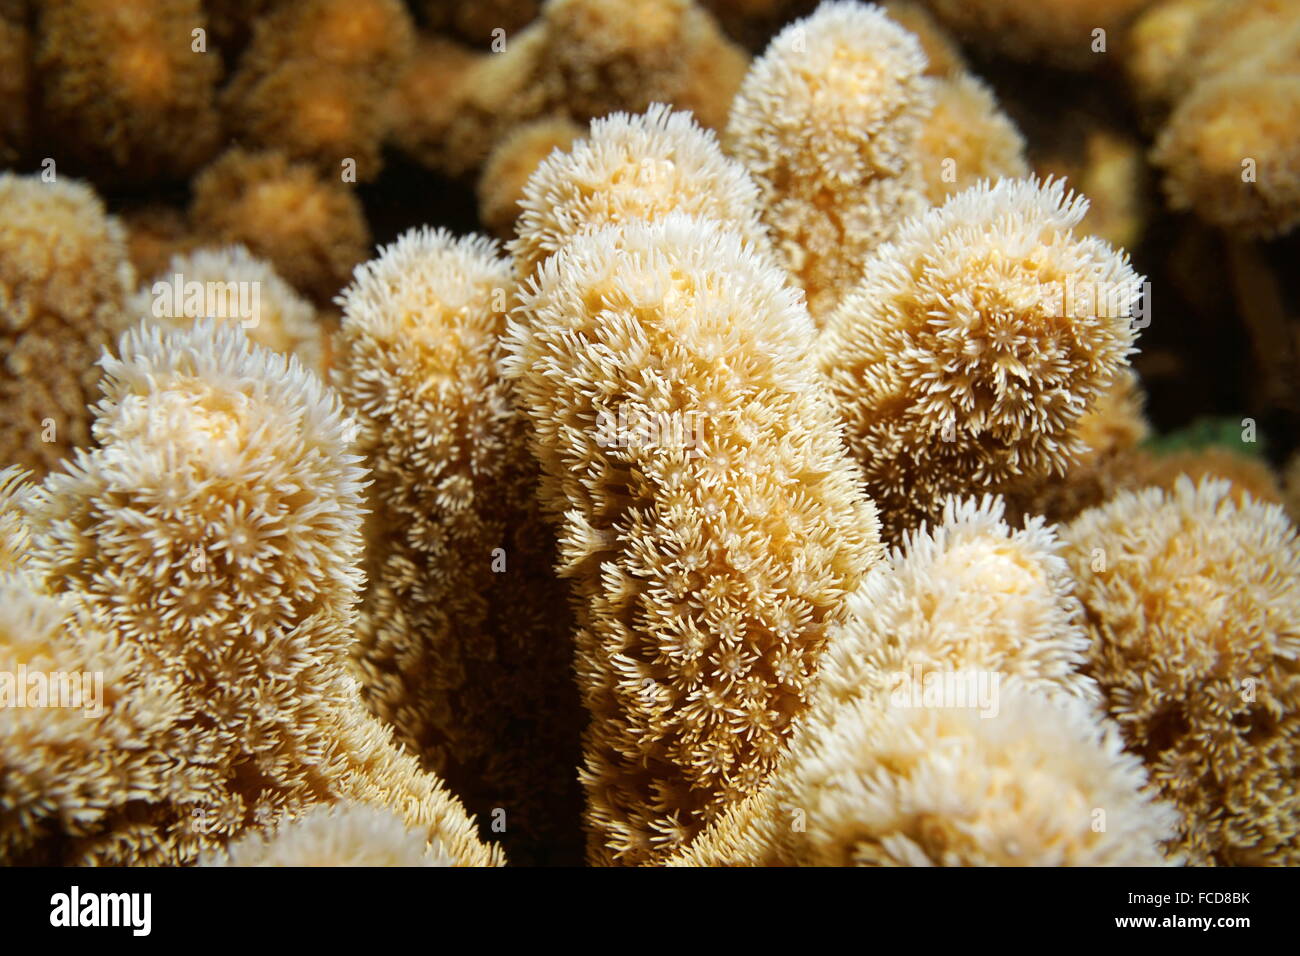 Underwater life, close up of hump coral or finger coral, Porites porites, Caribbean sea Stock Photo